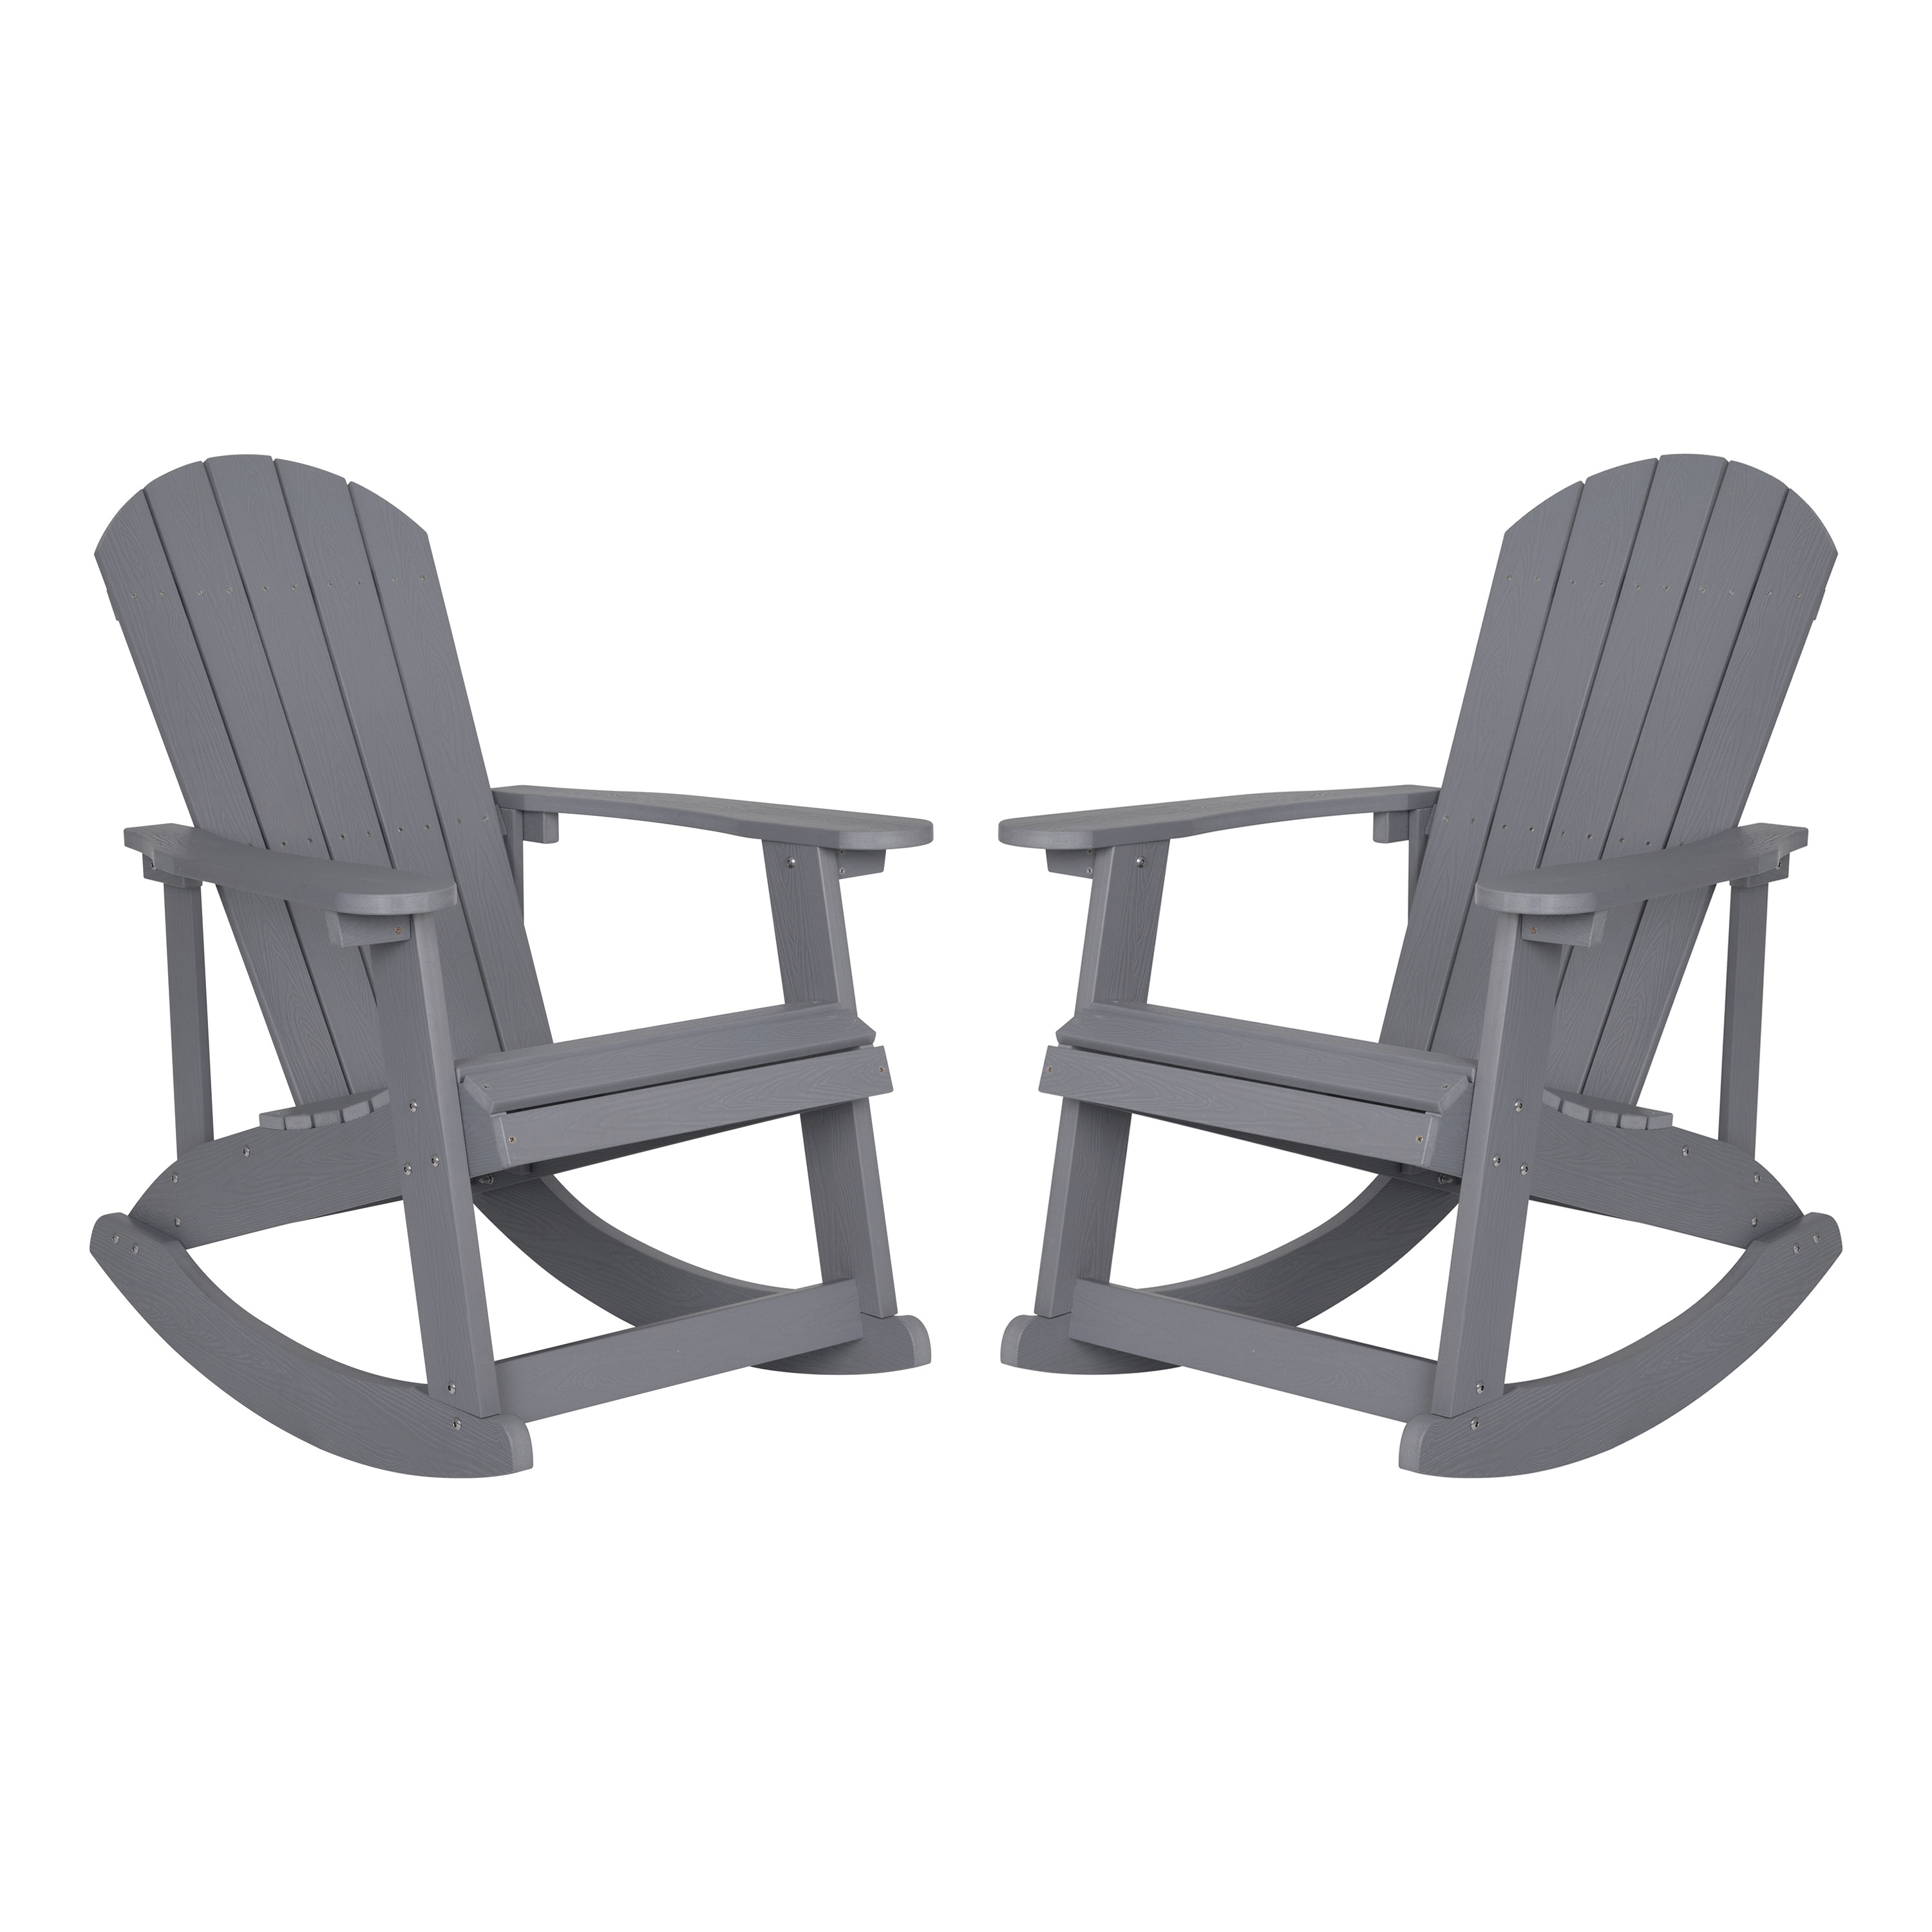 Flash Furniture JJ-C14705-GY-2-GG Gray All-Weather Poly Resin Wood Adirondack Rocking Chair, Set of 2